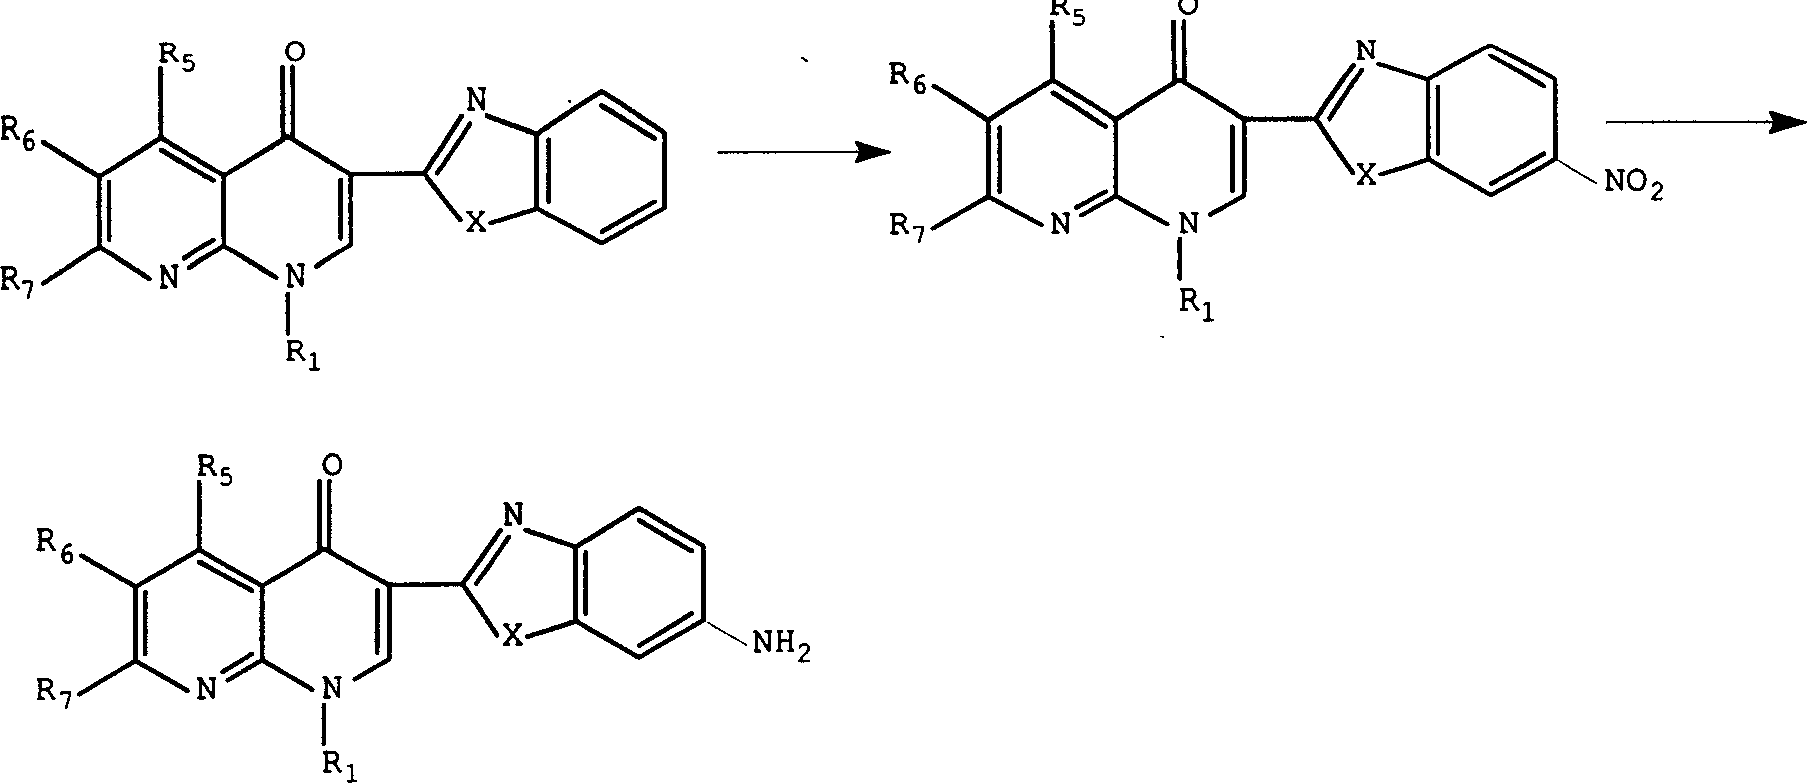 3-substituted nalidixic acid analog compound and its preparation method and uses in pharmacy